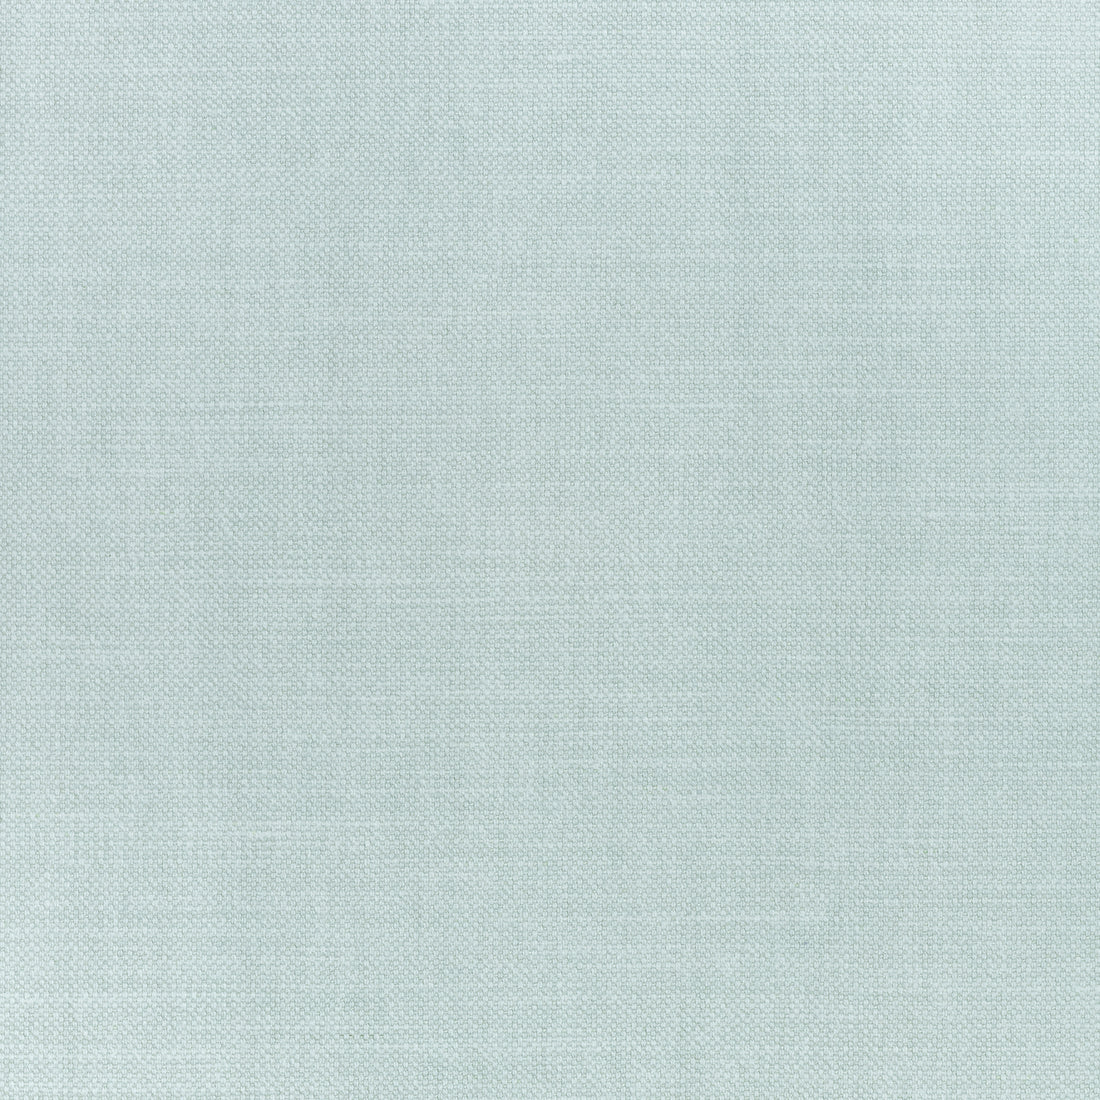 Prisma fabric in glacier color - pattern number W70150 - by Thibaut in the Woven Resource Vol 12 Prisma Fabrics collection